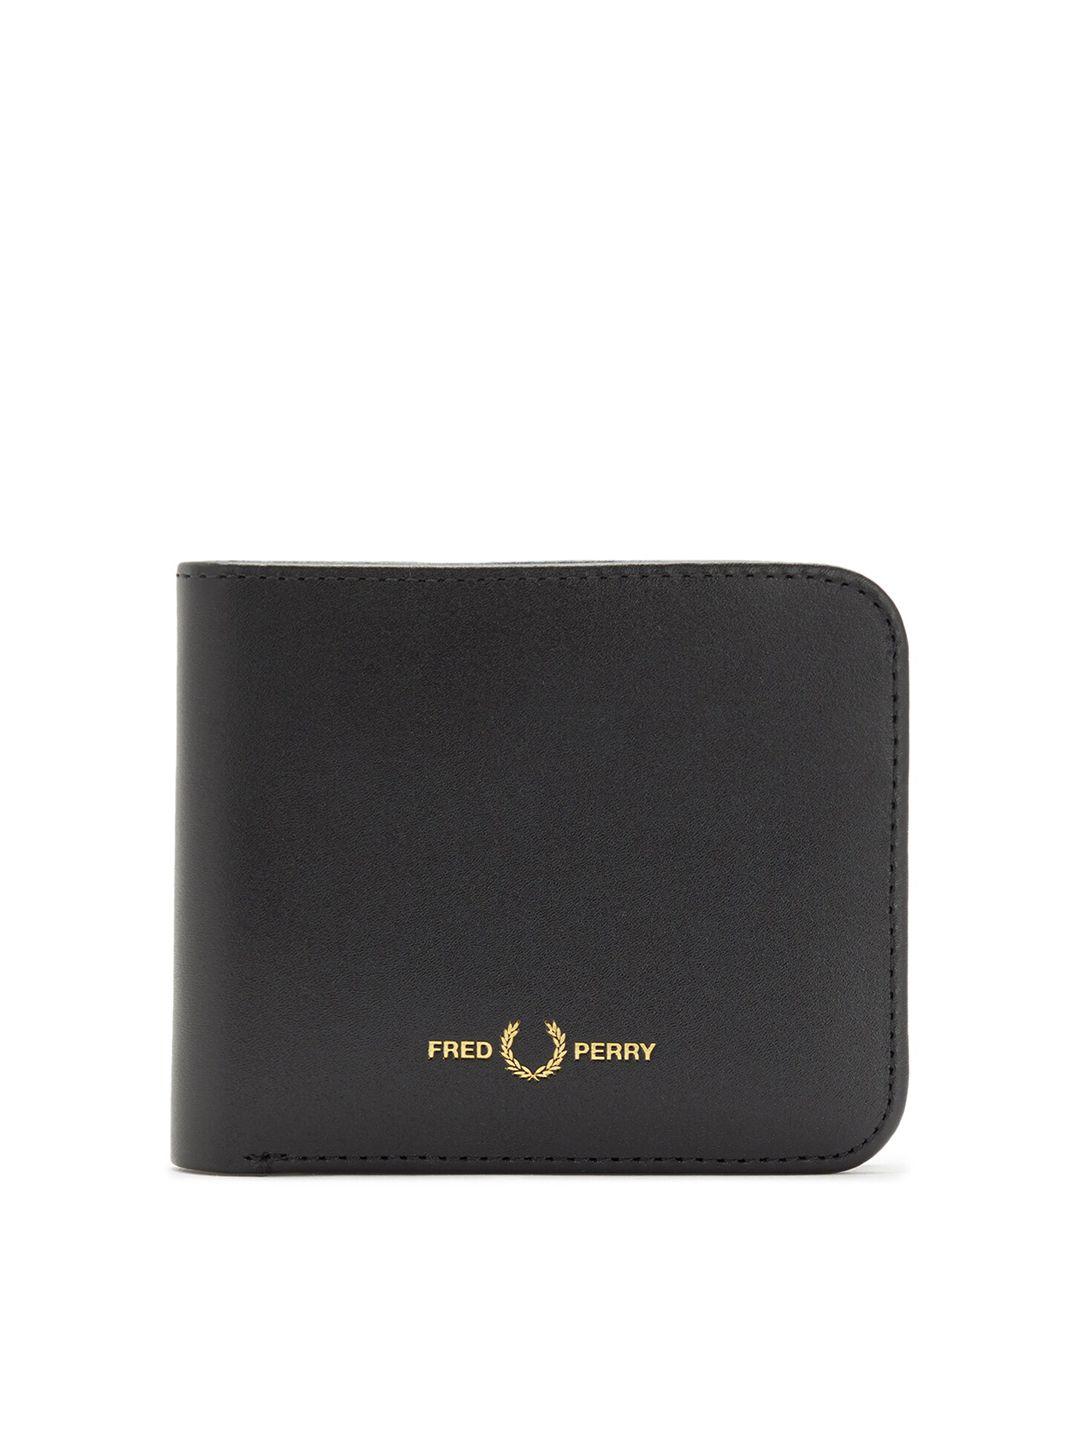 fred perry leather two fold wallet